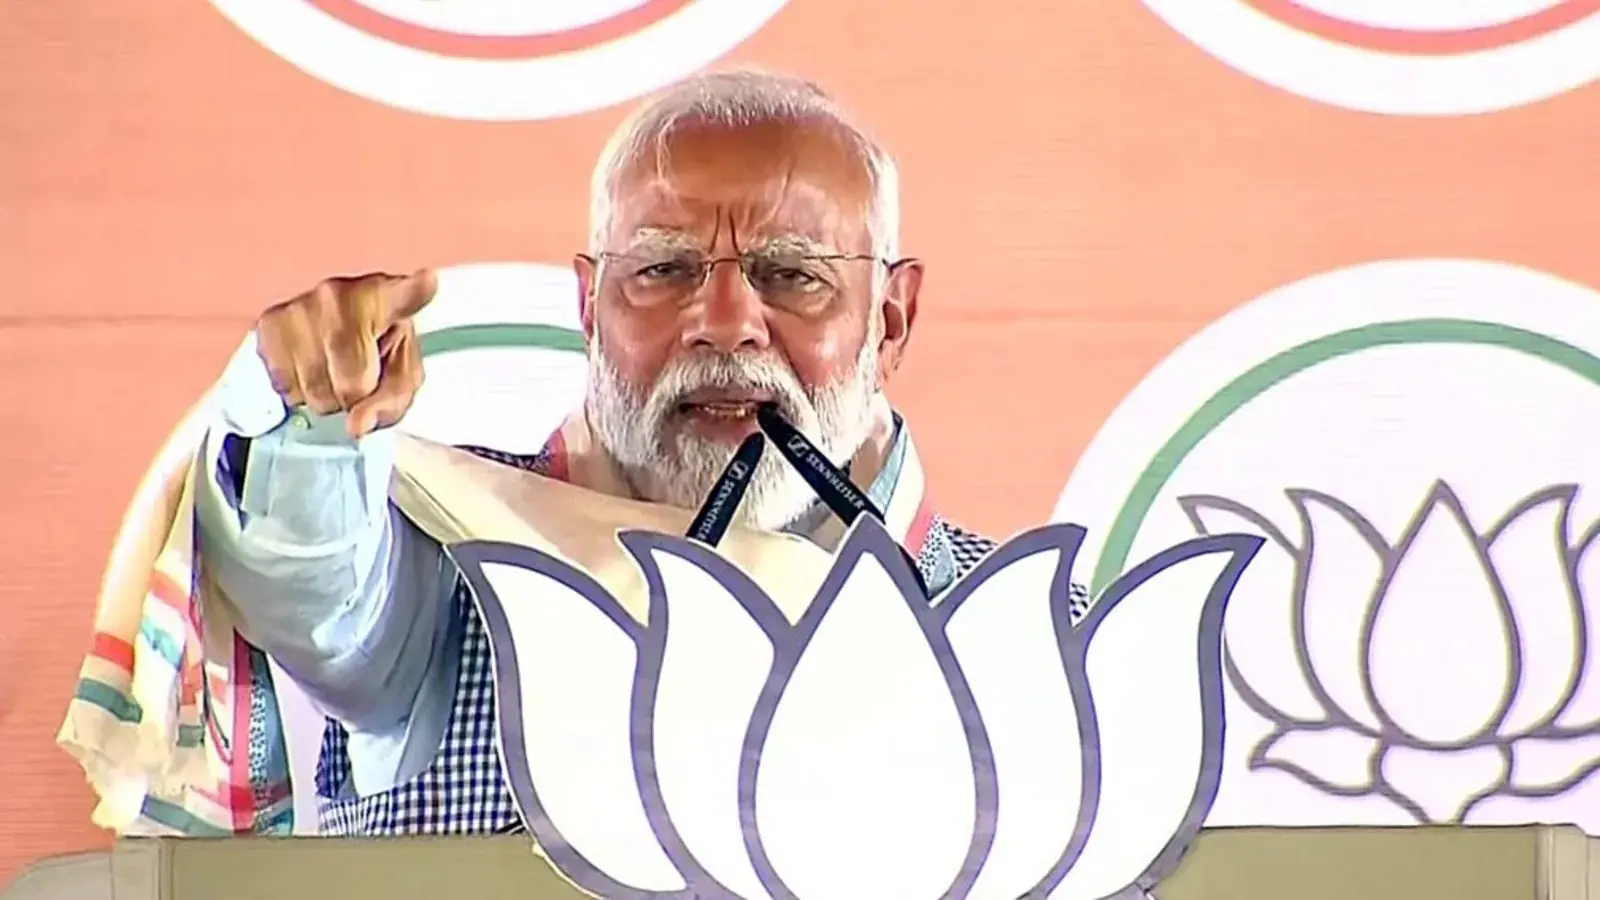 People of Maharashtra resolved to make NDA candidates win, PM Modi claims before rally in Chandrapur